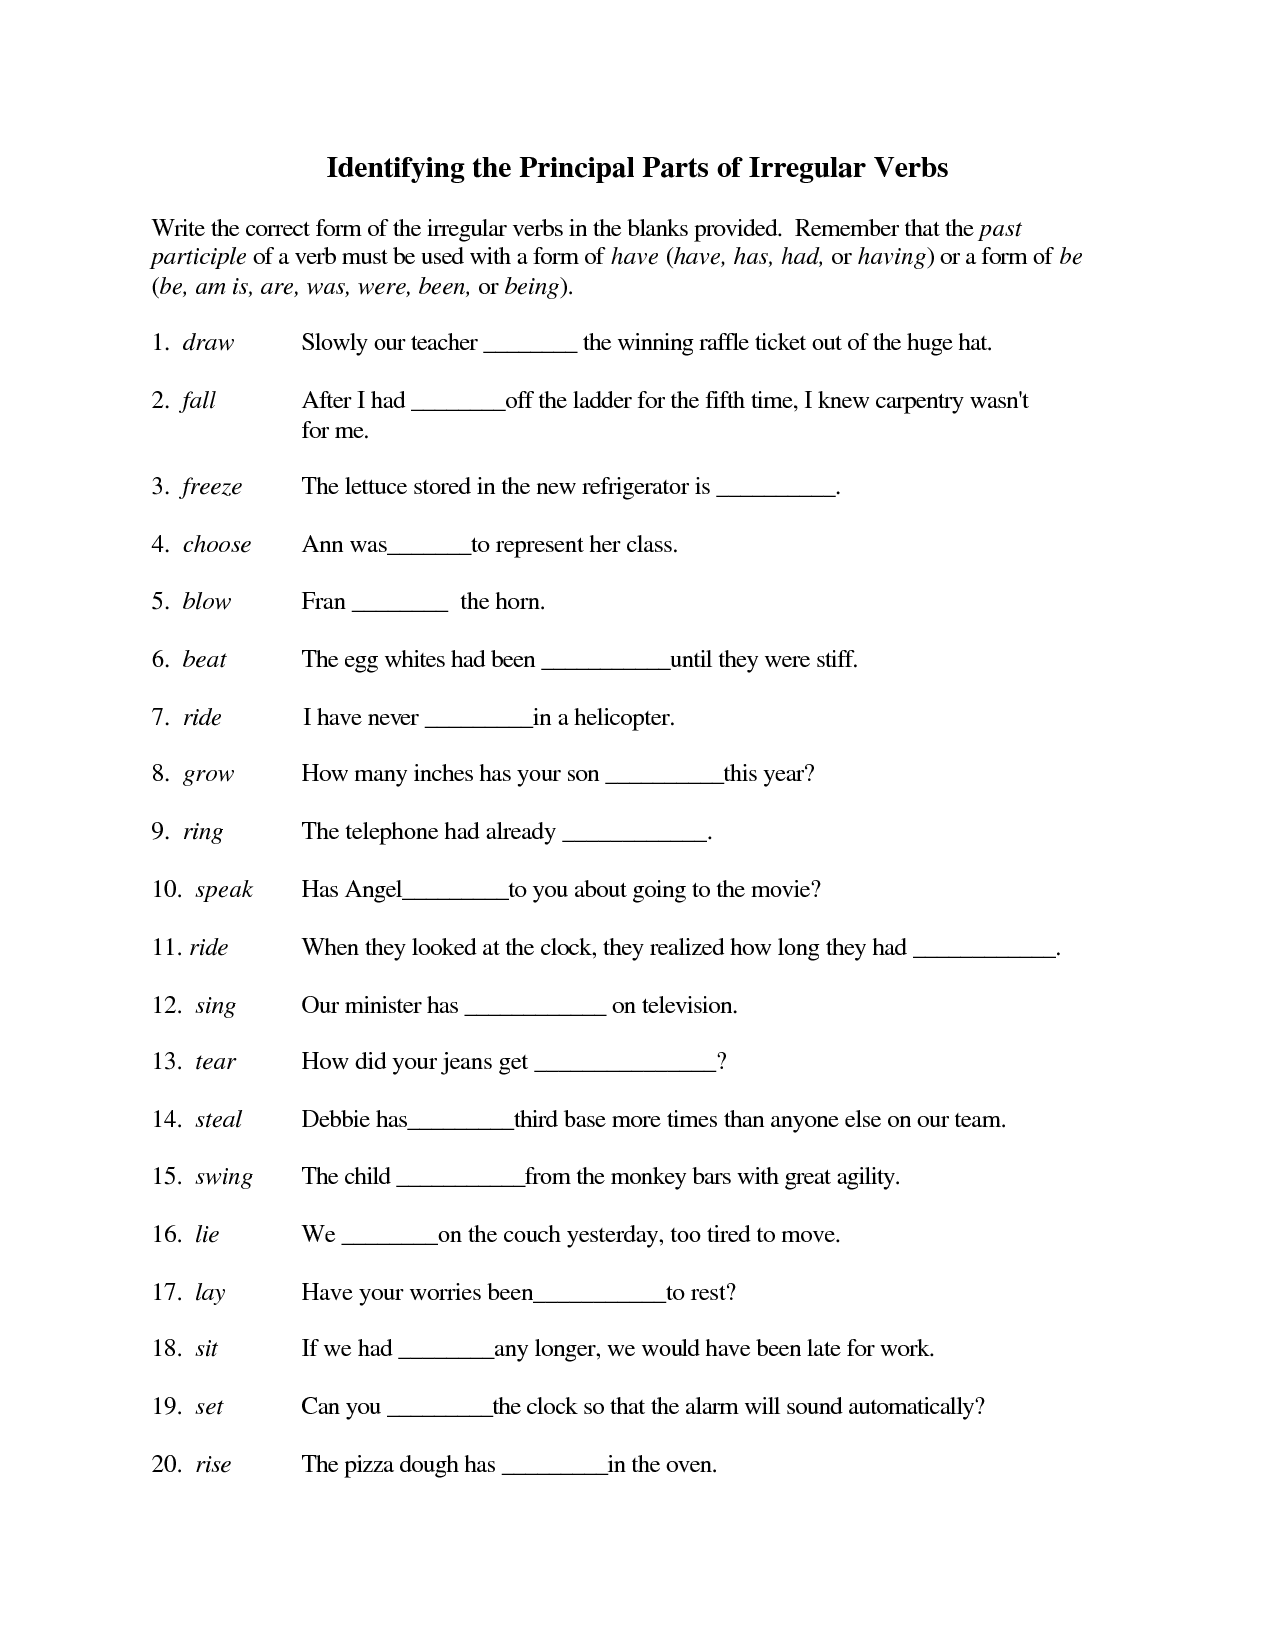 verbs-worksheets-for-3rd-grade